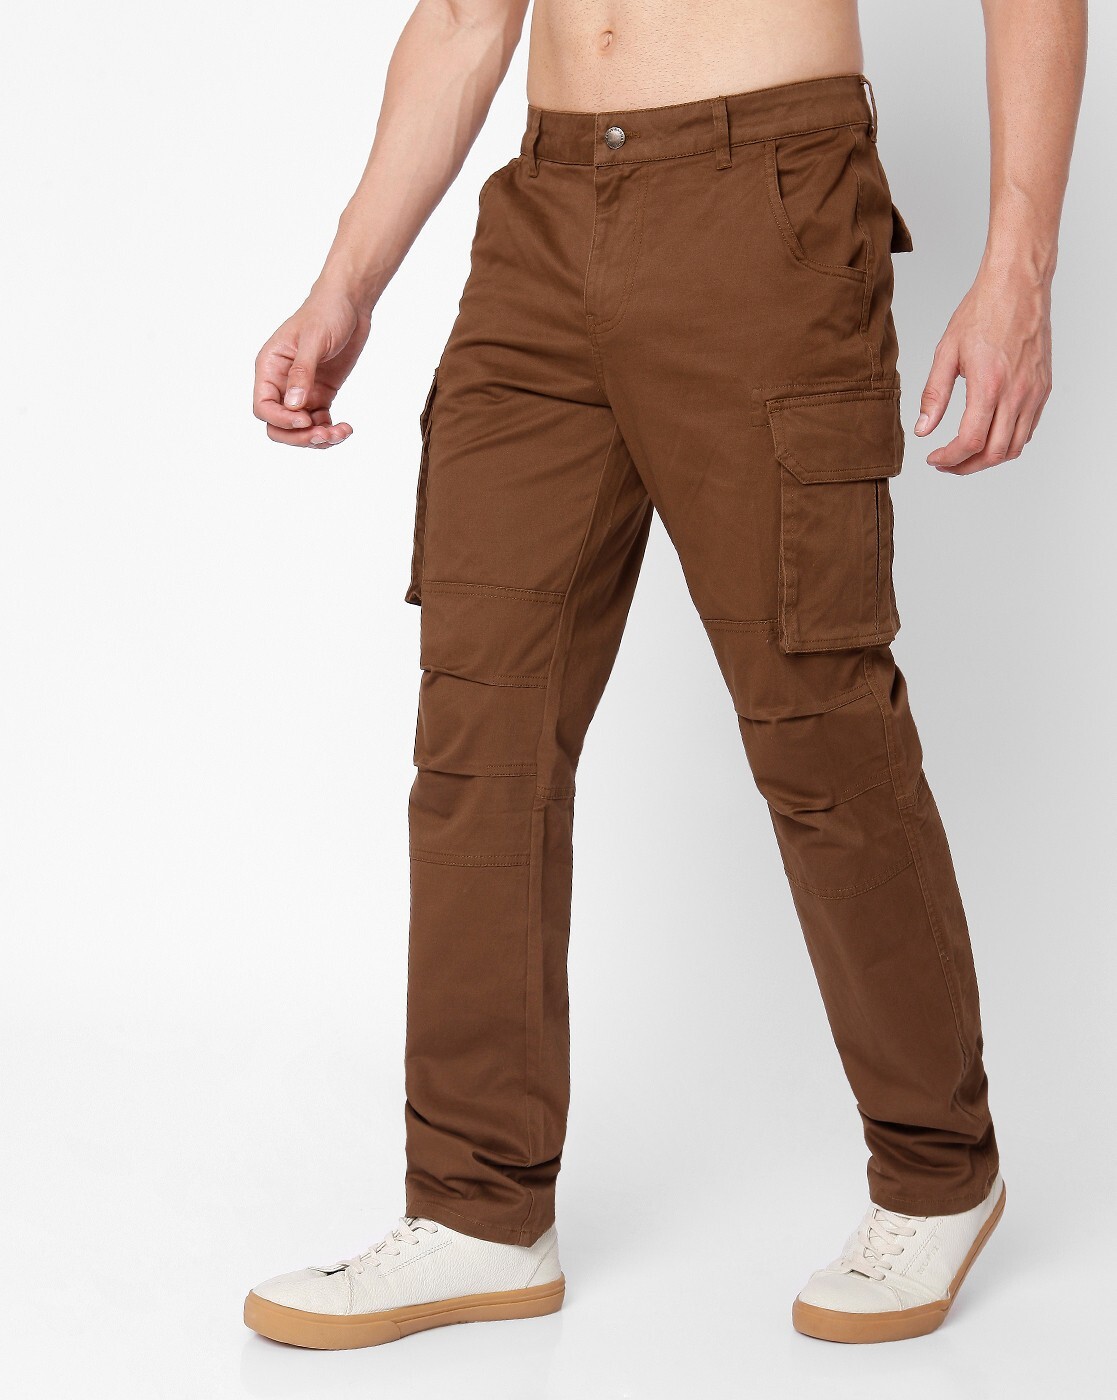 Buy Grey Trousers  Pants for Boys by GAS Online  Ajiocom